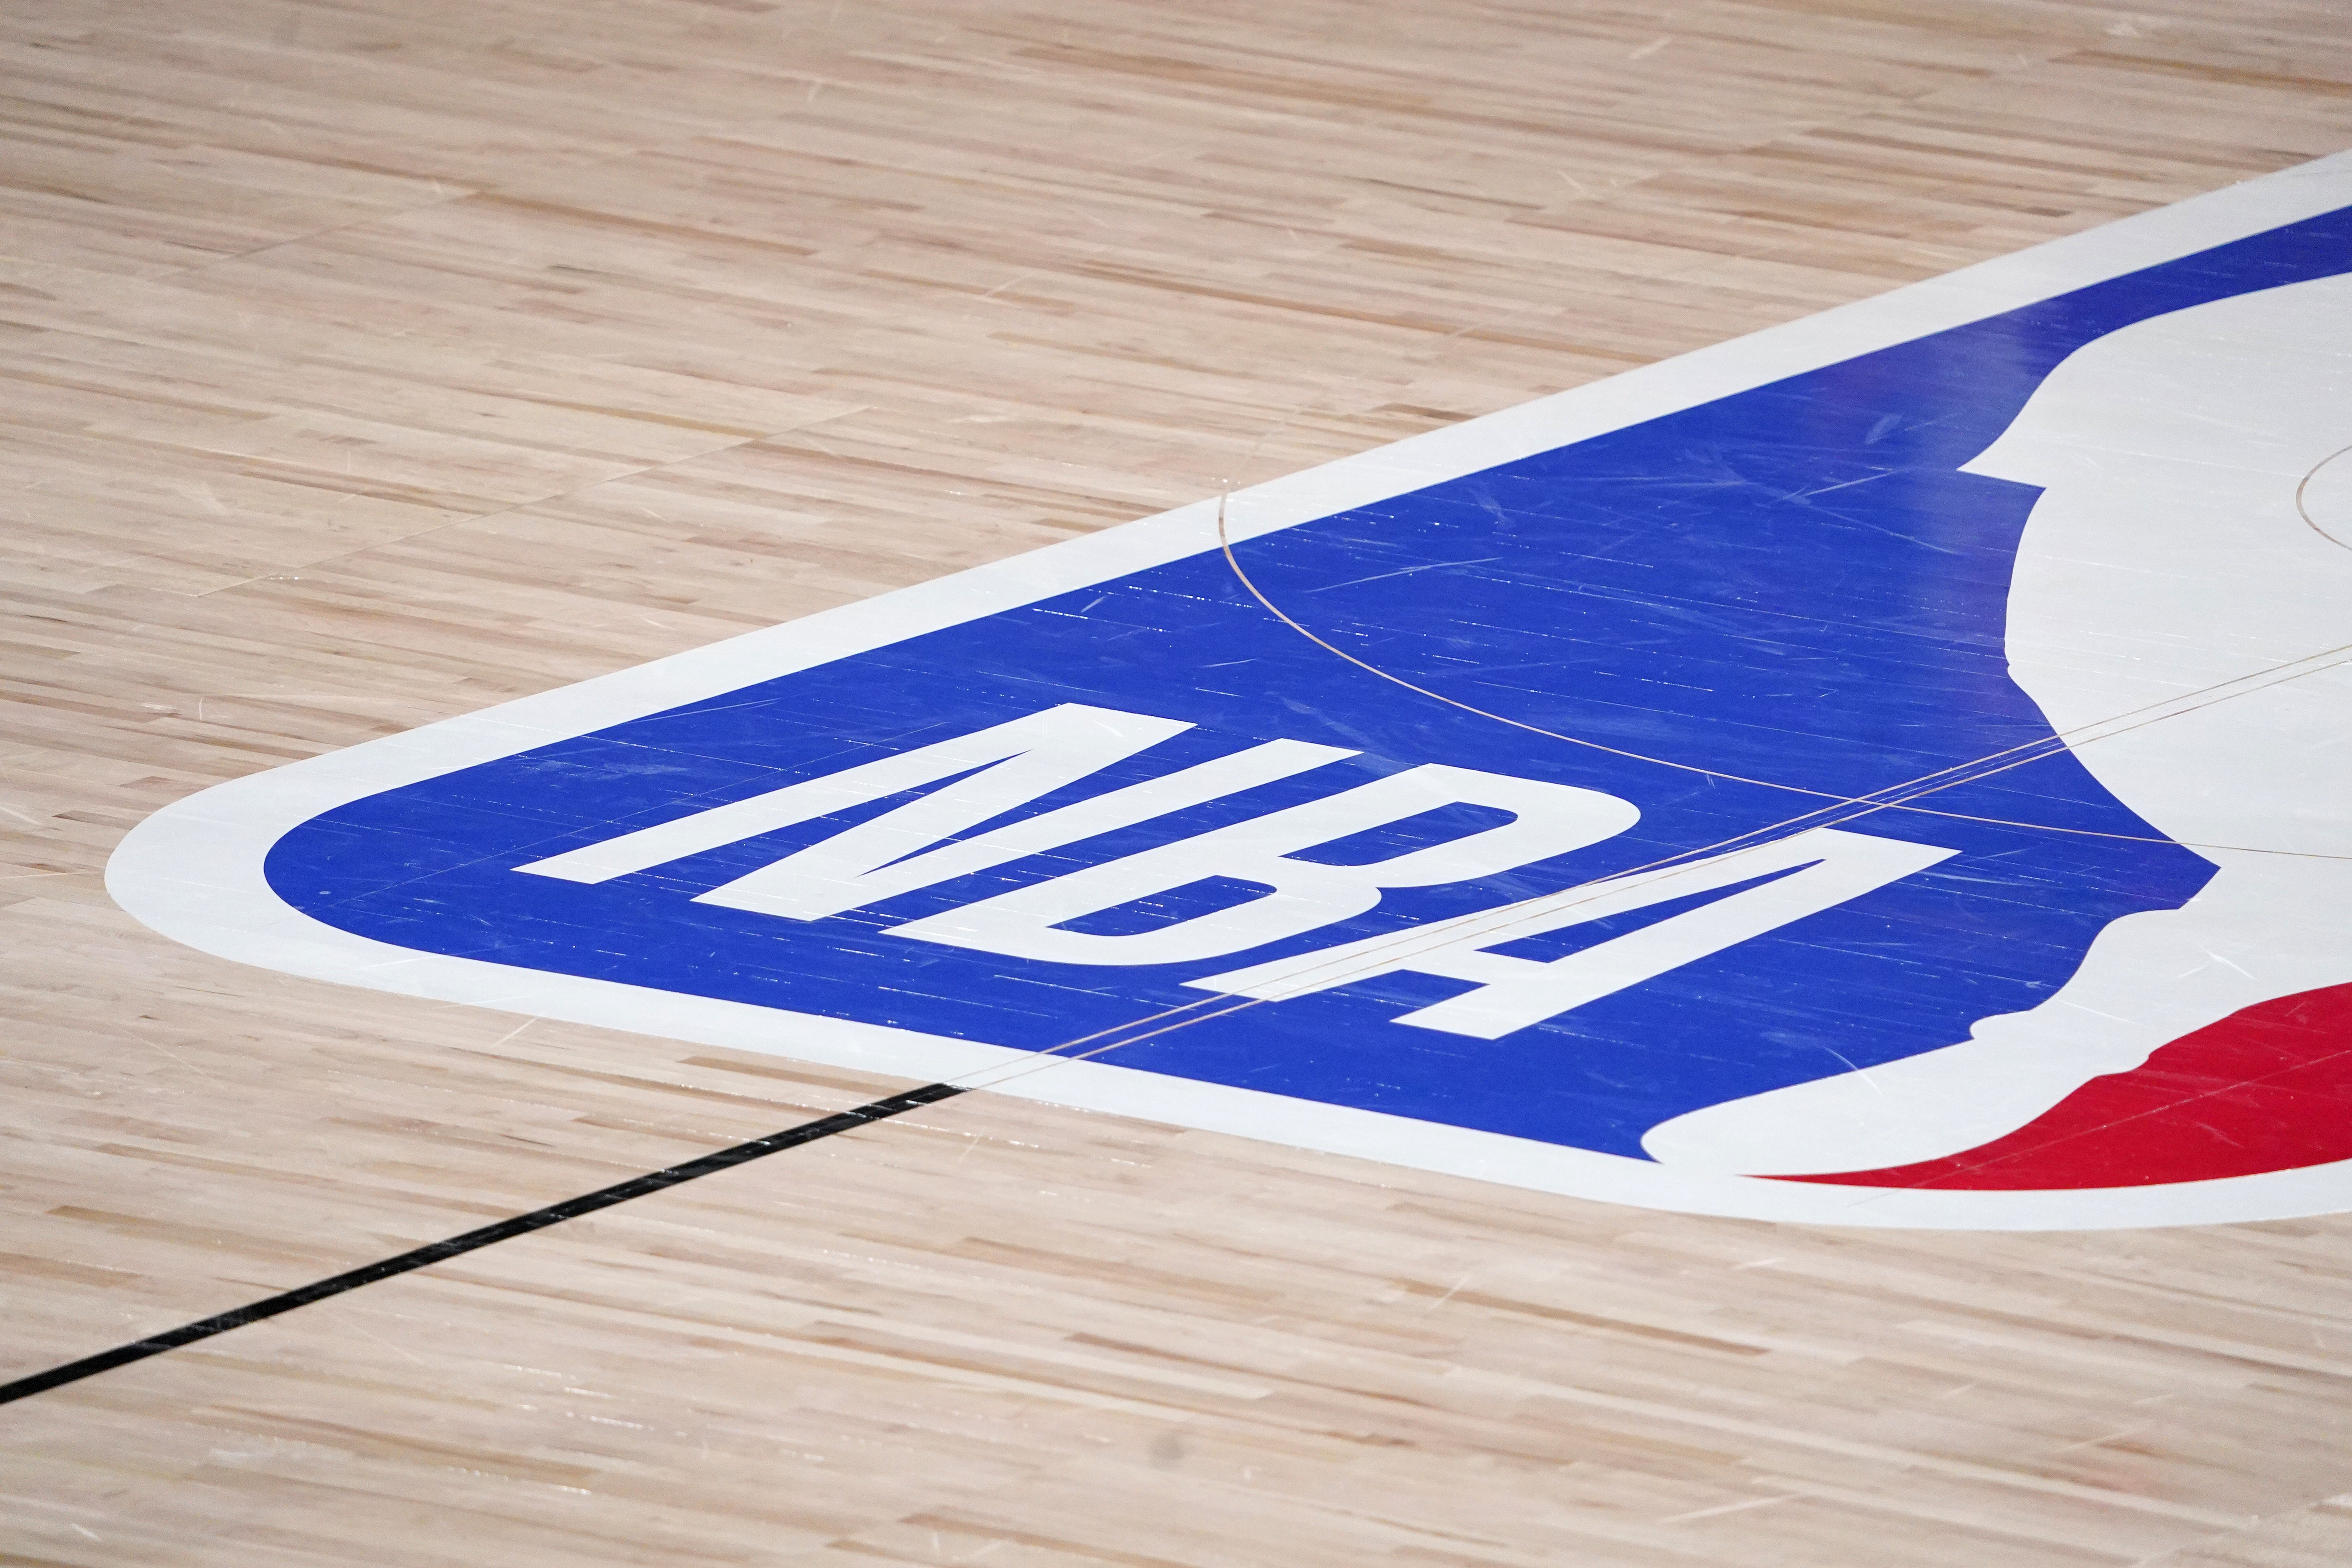 Nba Schedule 2022 23 Release Date Nba Schedule 2022: Regular Season, Playoffs, Finals And Key Dates  Reportedly Revealed | Bleacher Report | Latest News, Videos And Highlights